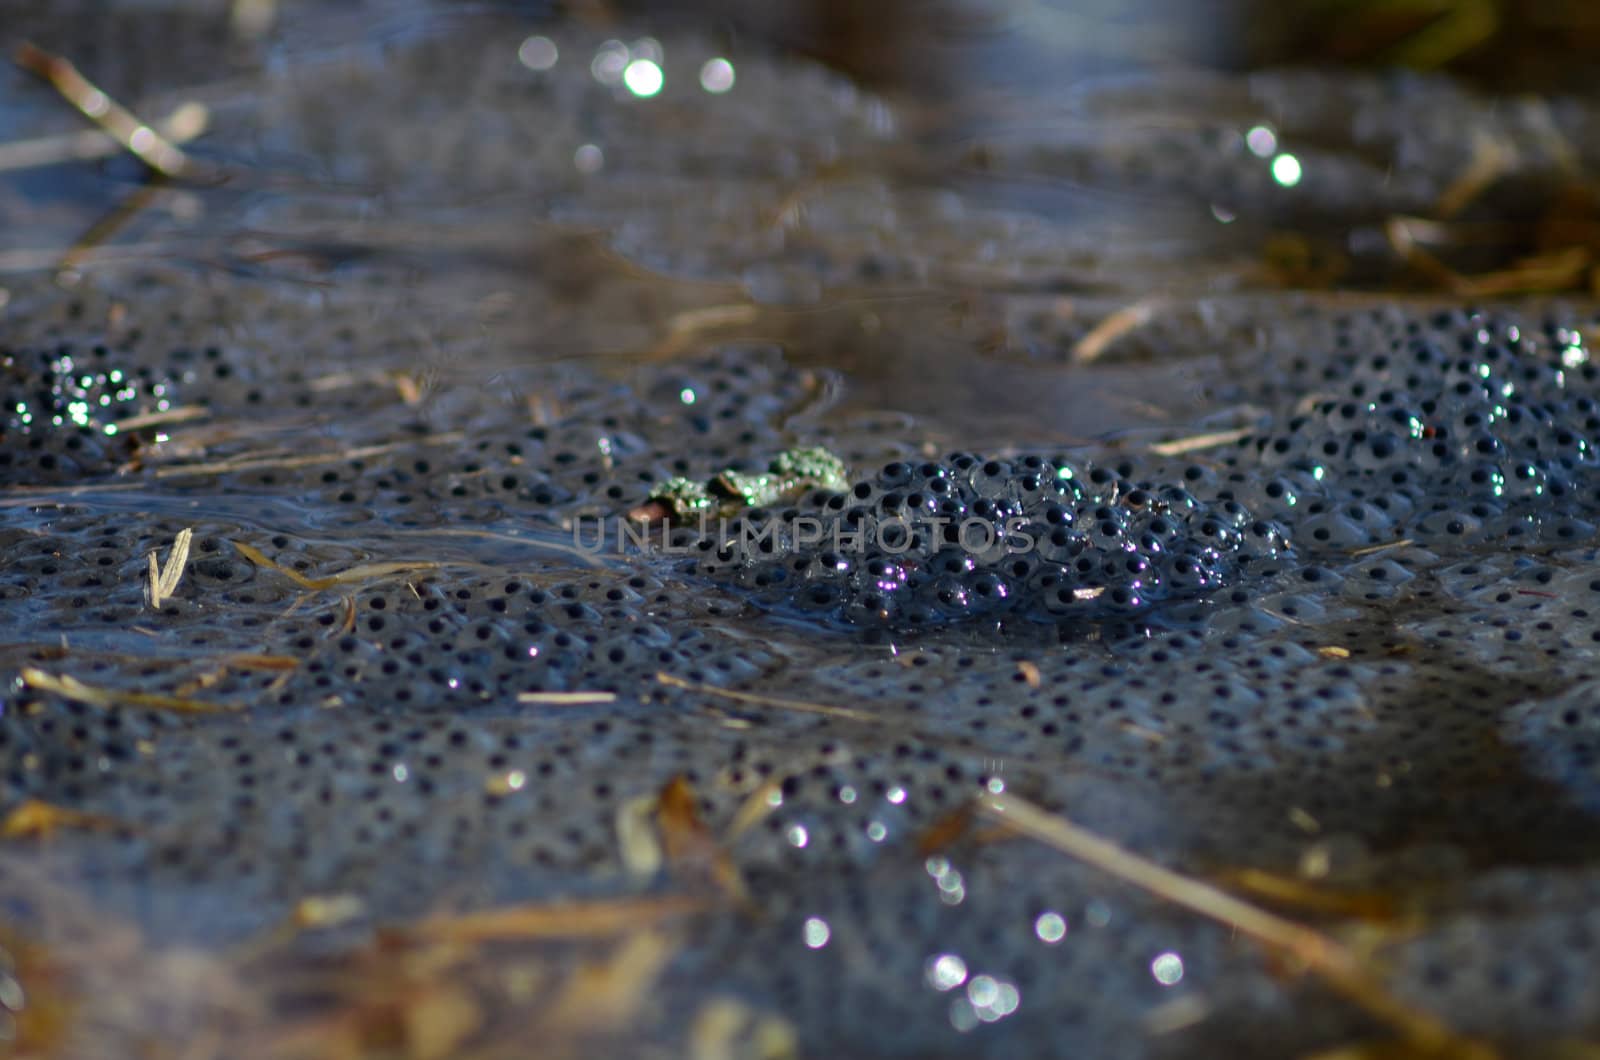 Close Up of some frog spawn in water